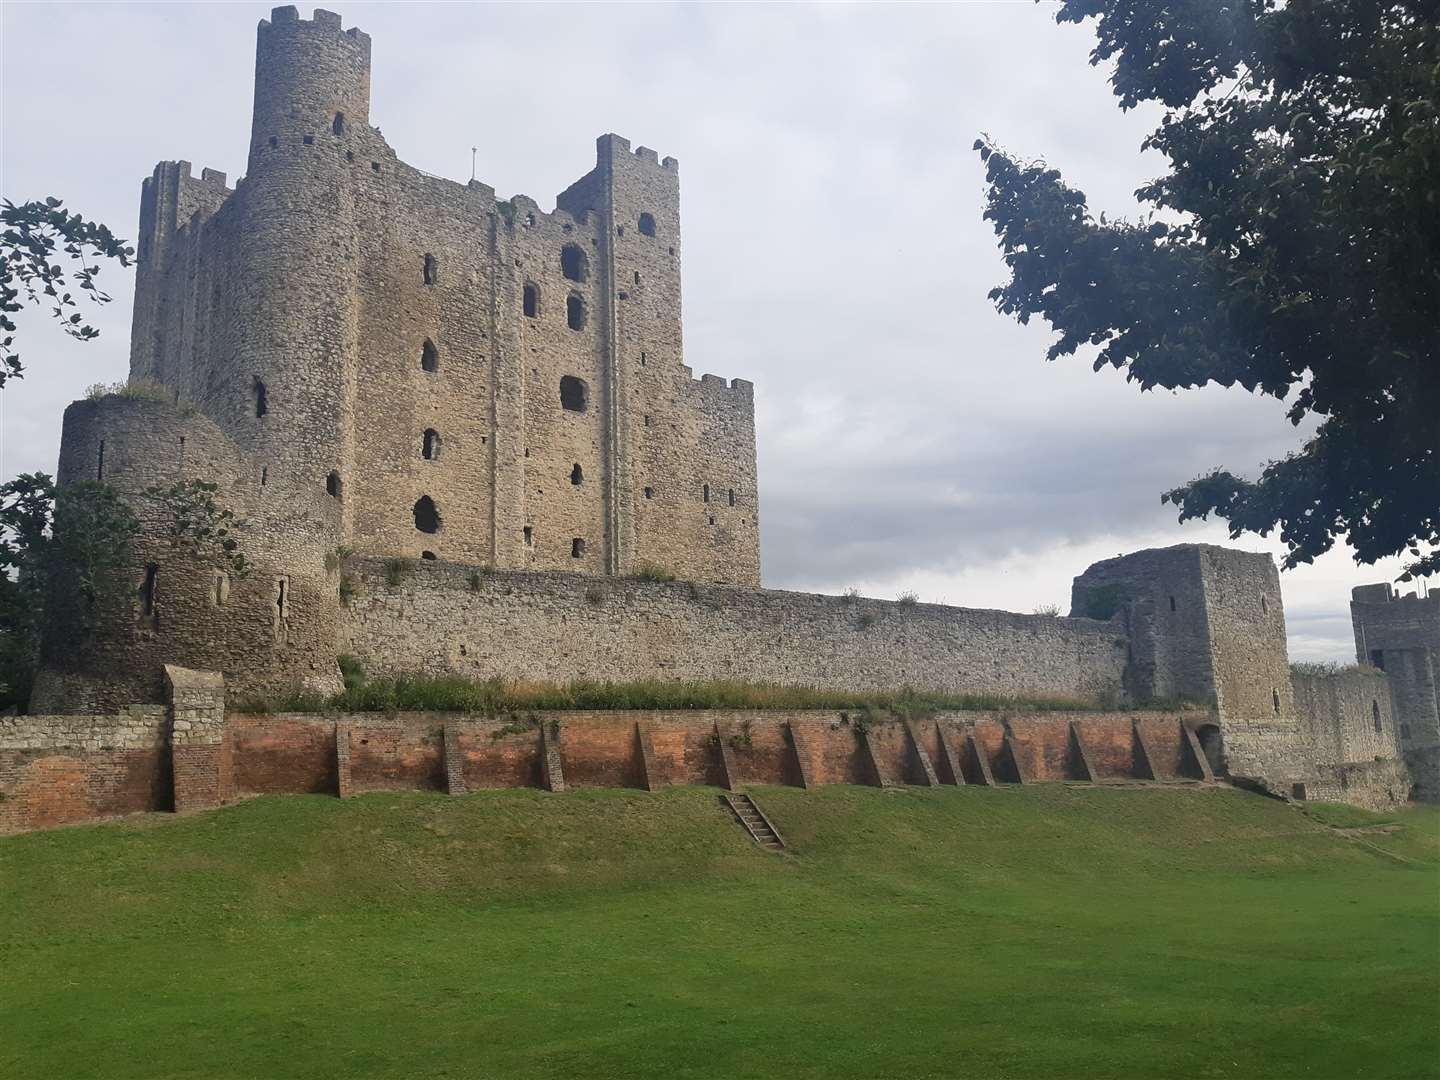 Rochester has plenty of photogenic spots, such as the castle in Boley Hill